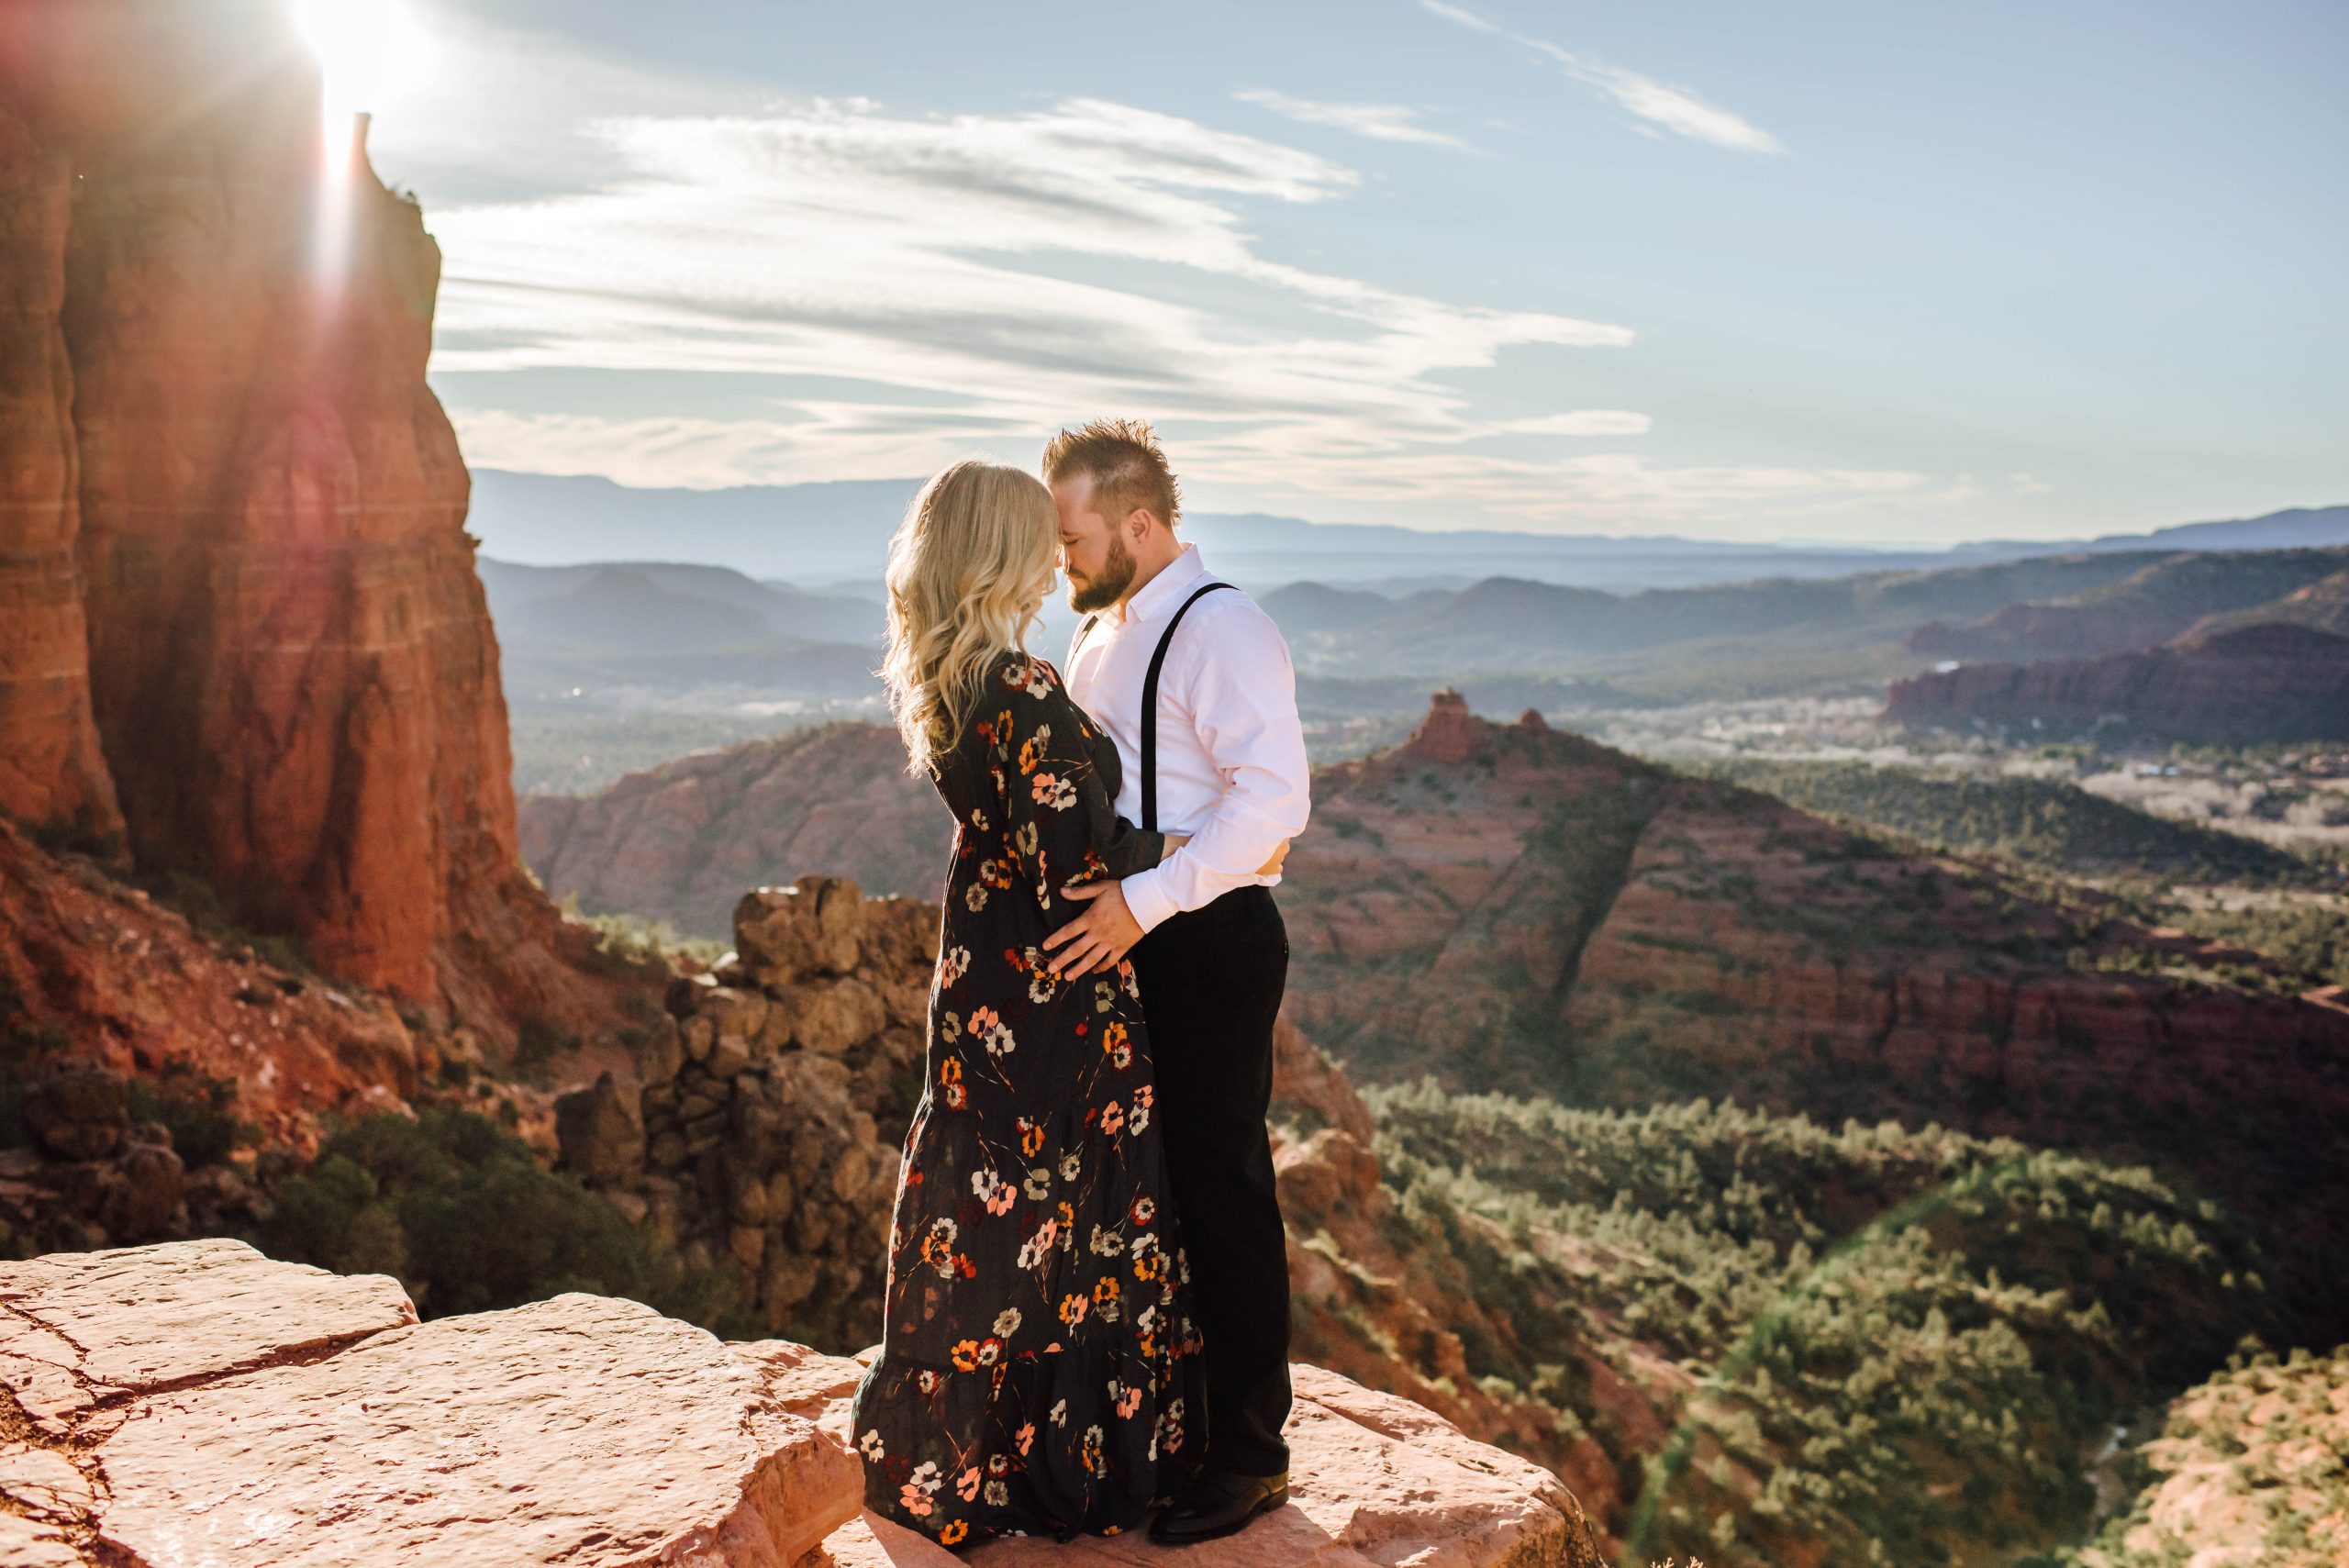 Engagement session taking place on top of Cathedral Rock in Sedona, AZ